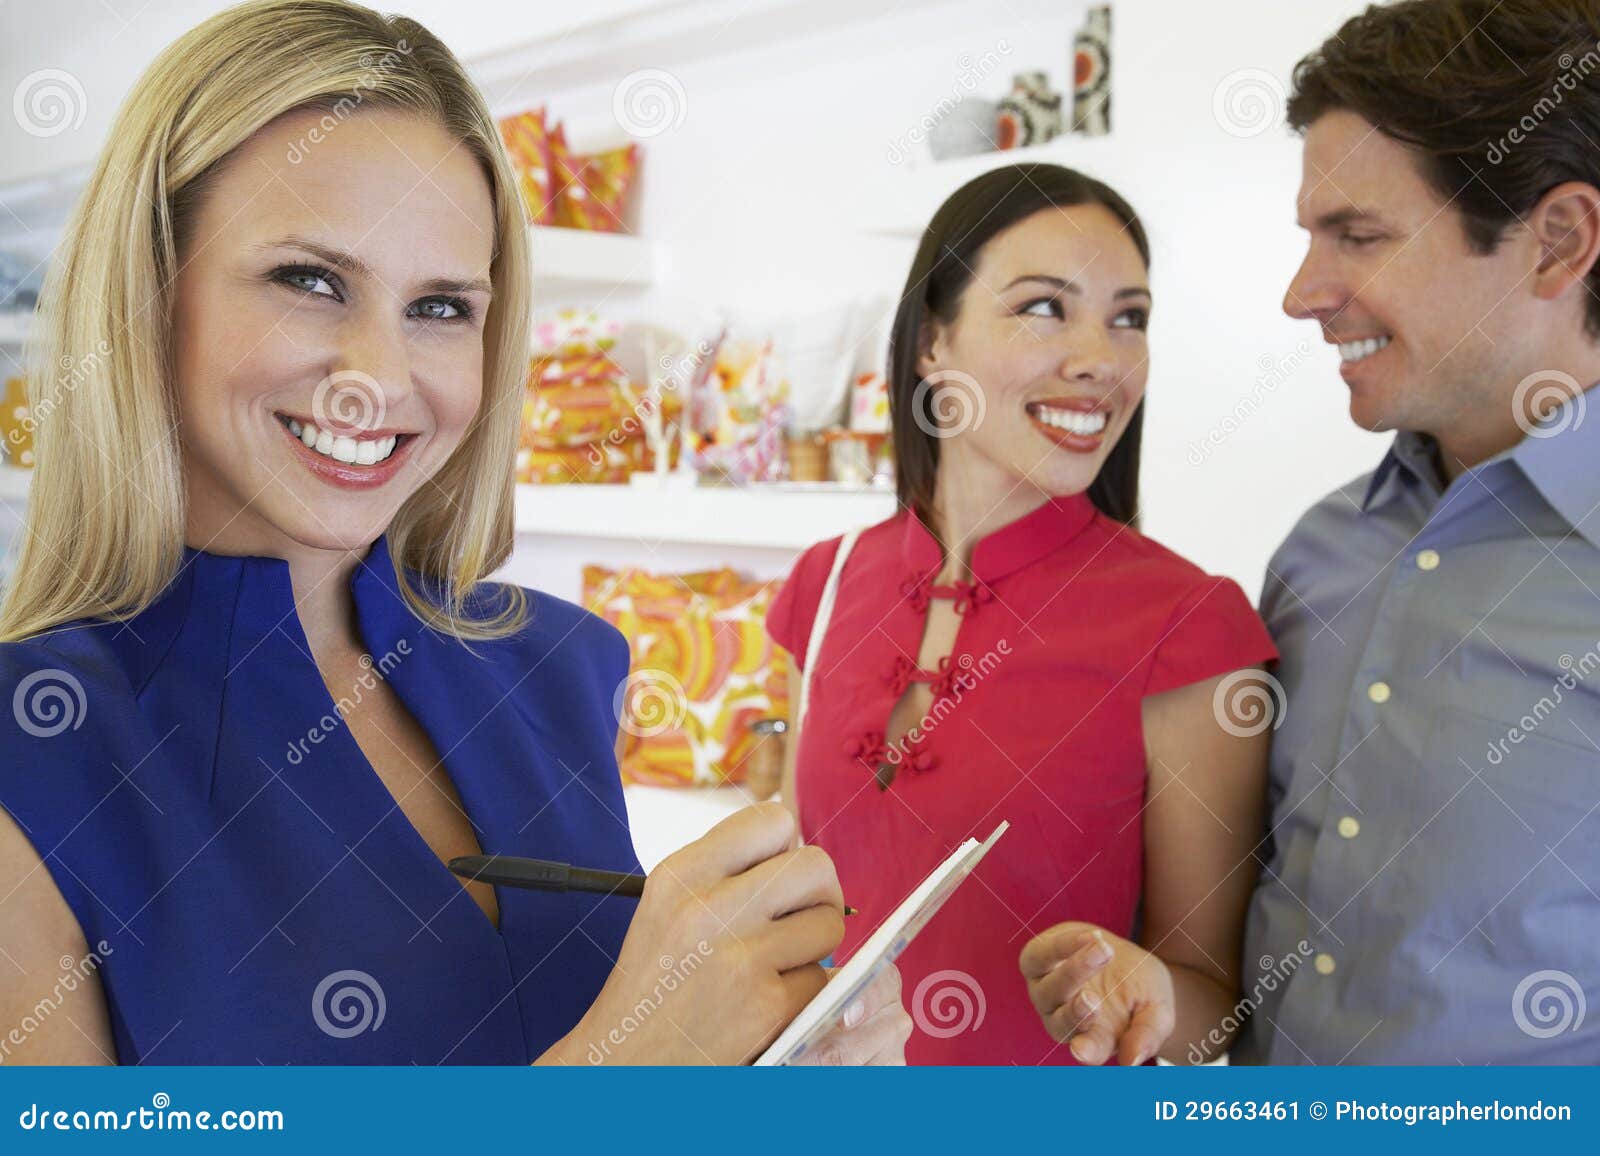 saleswoman and couple at store